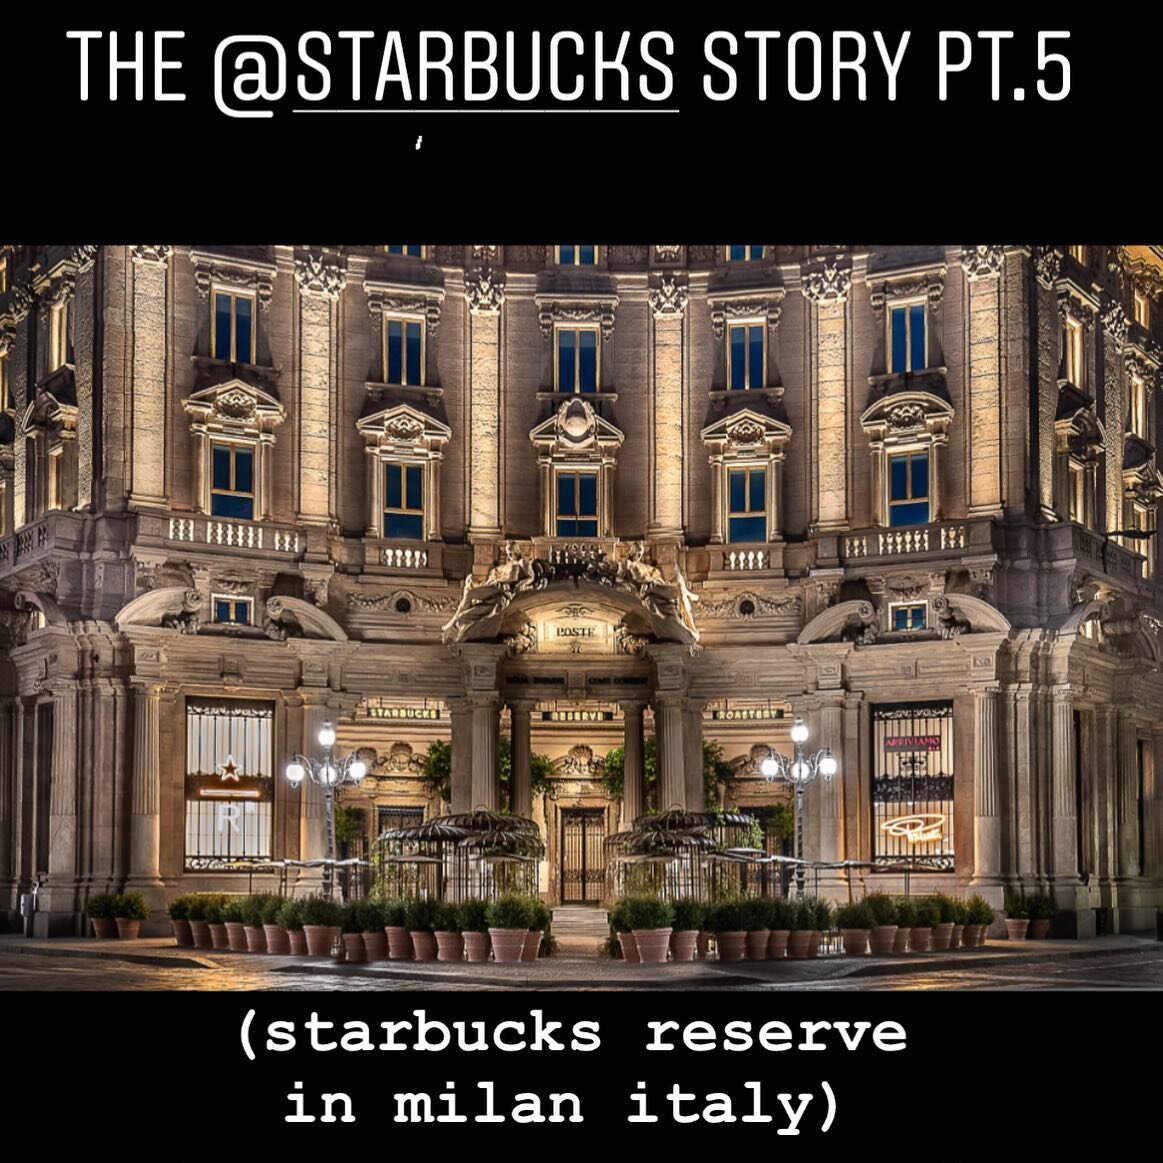 A great American story! Join me for #StoryTime where I share stories of some of the most iconic companies in the world! This week we&rsquo;re covering☕️ @starbucks which started almost 50 years ago and with the vision of @howard.schultz has risen to 